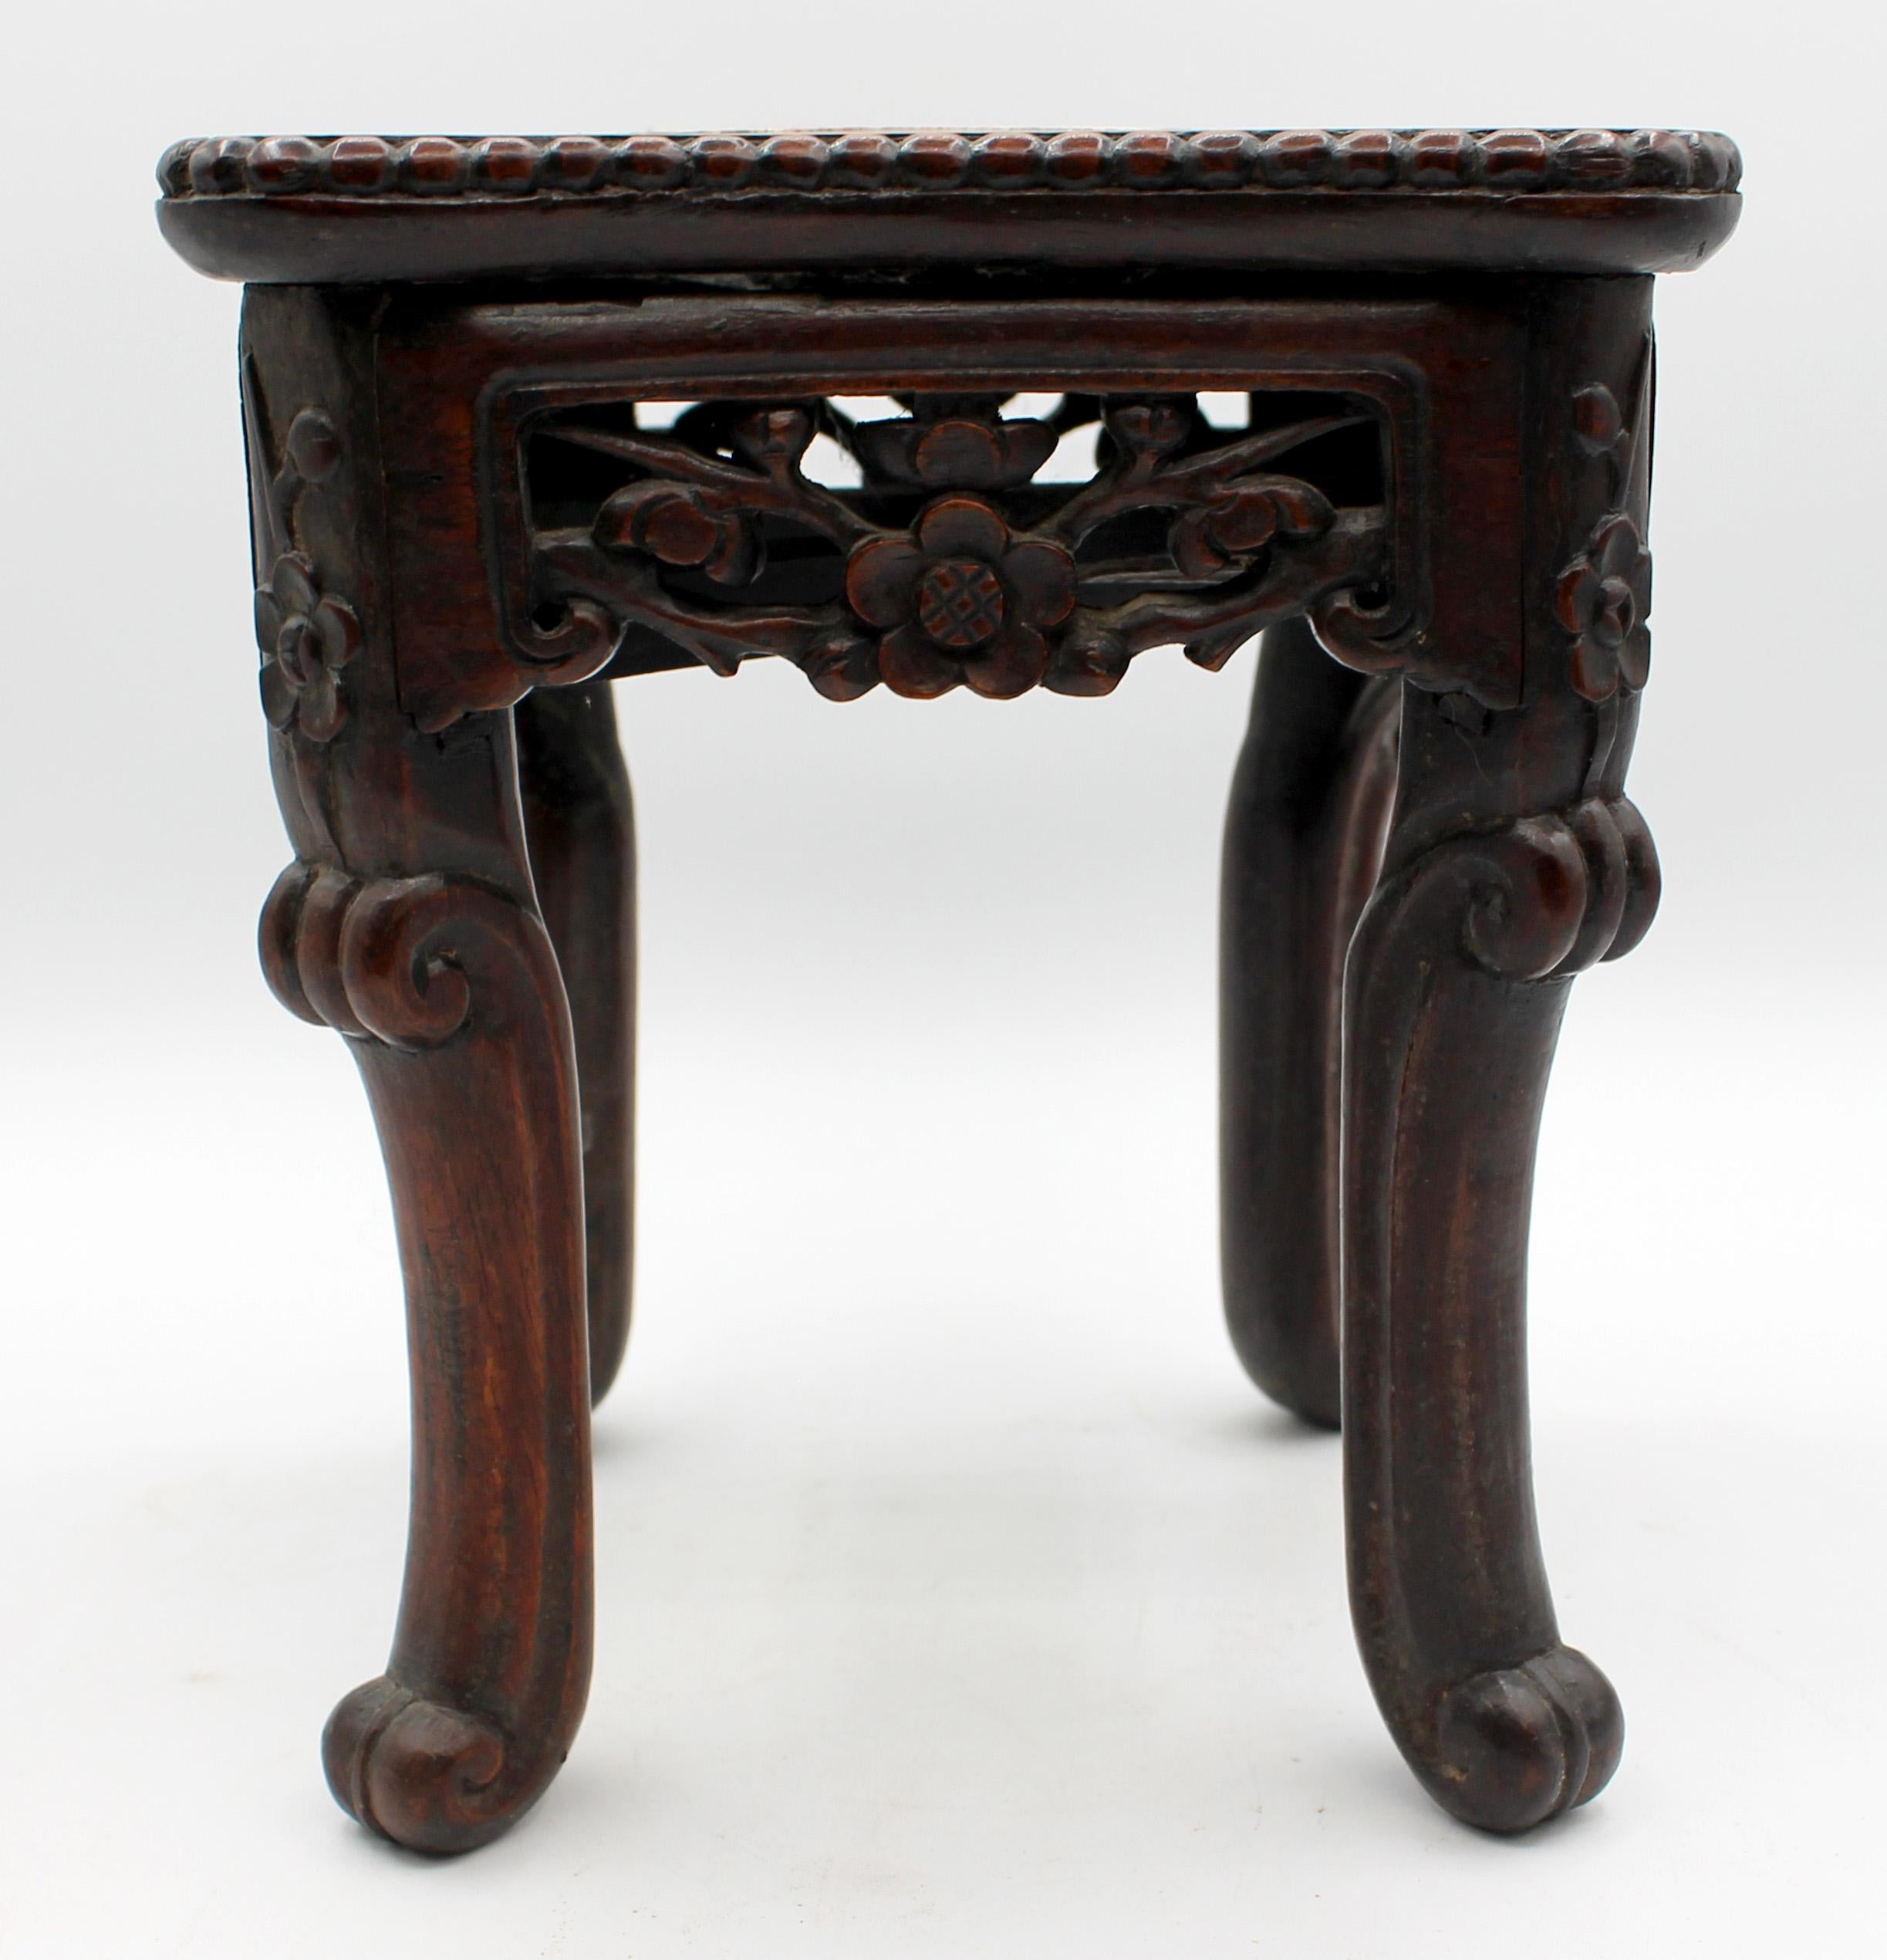 Chinese Export 3rd Quarter 19th Century Miniature Taboret Table For Sale